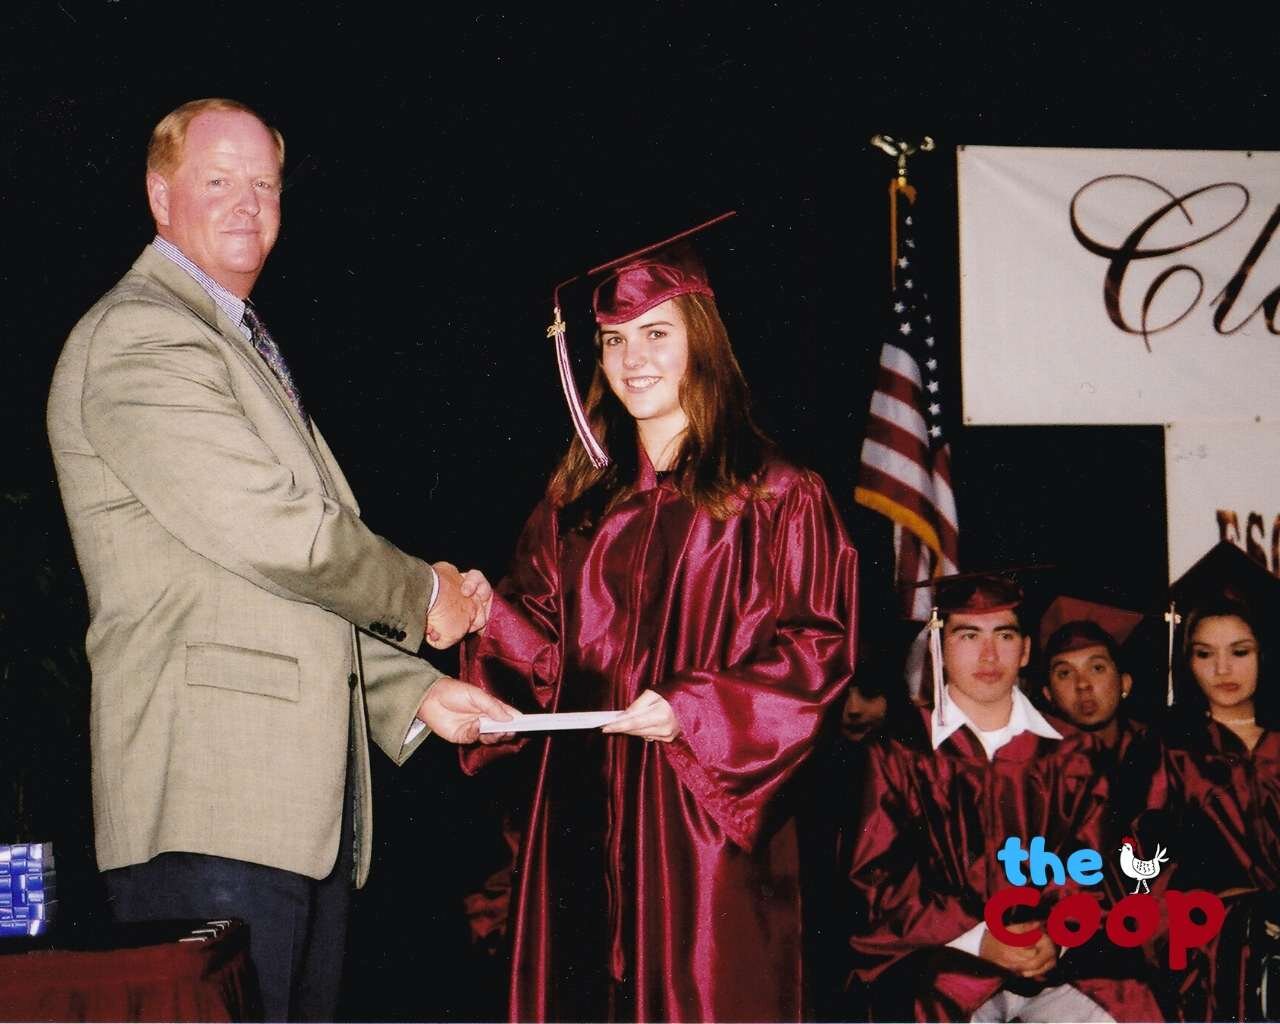  2001 - my high school graduation at 16 years old 